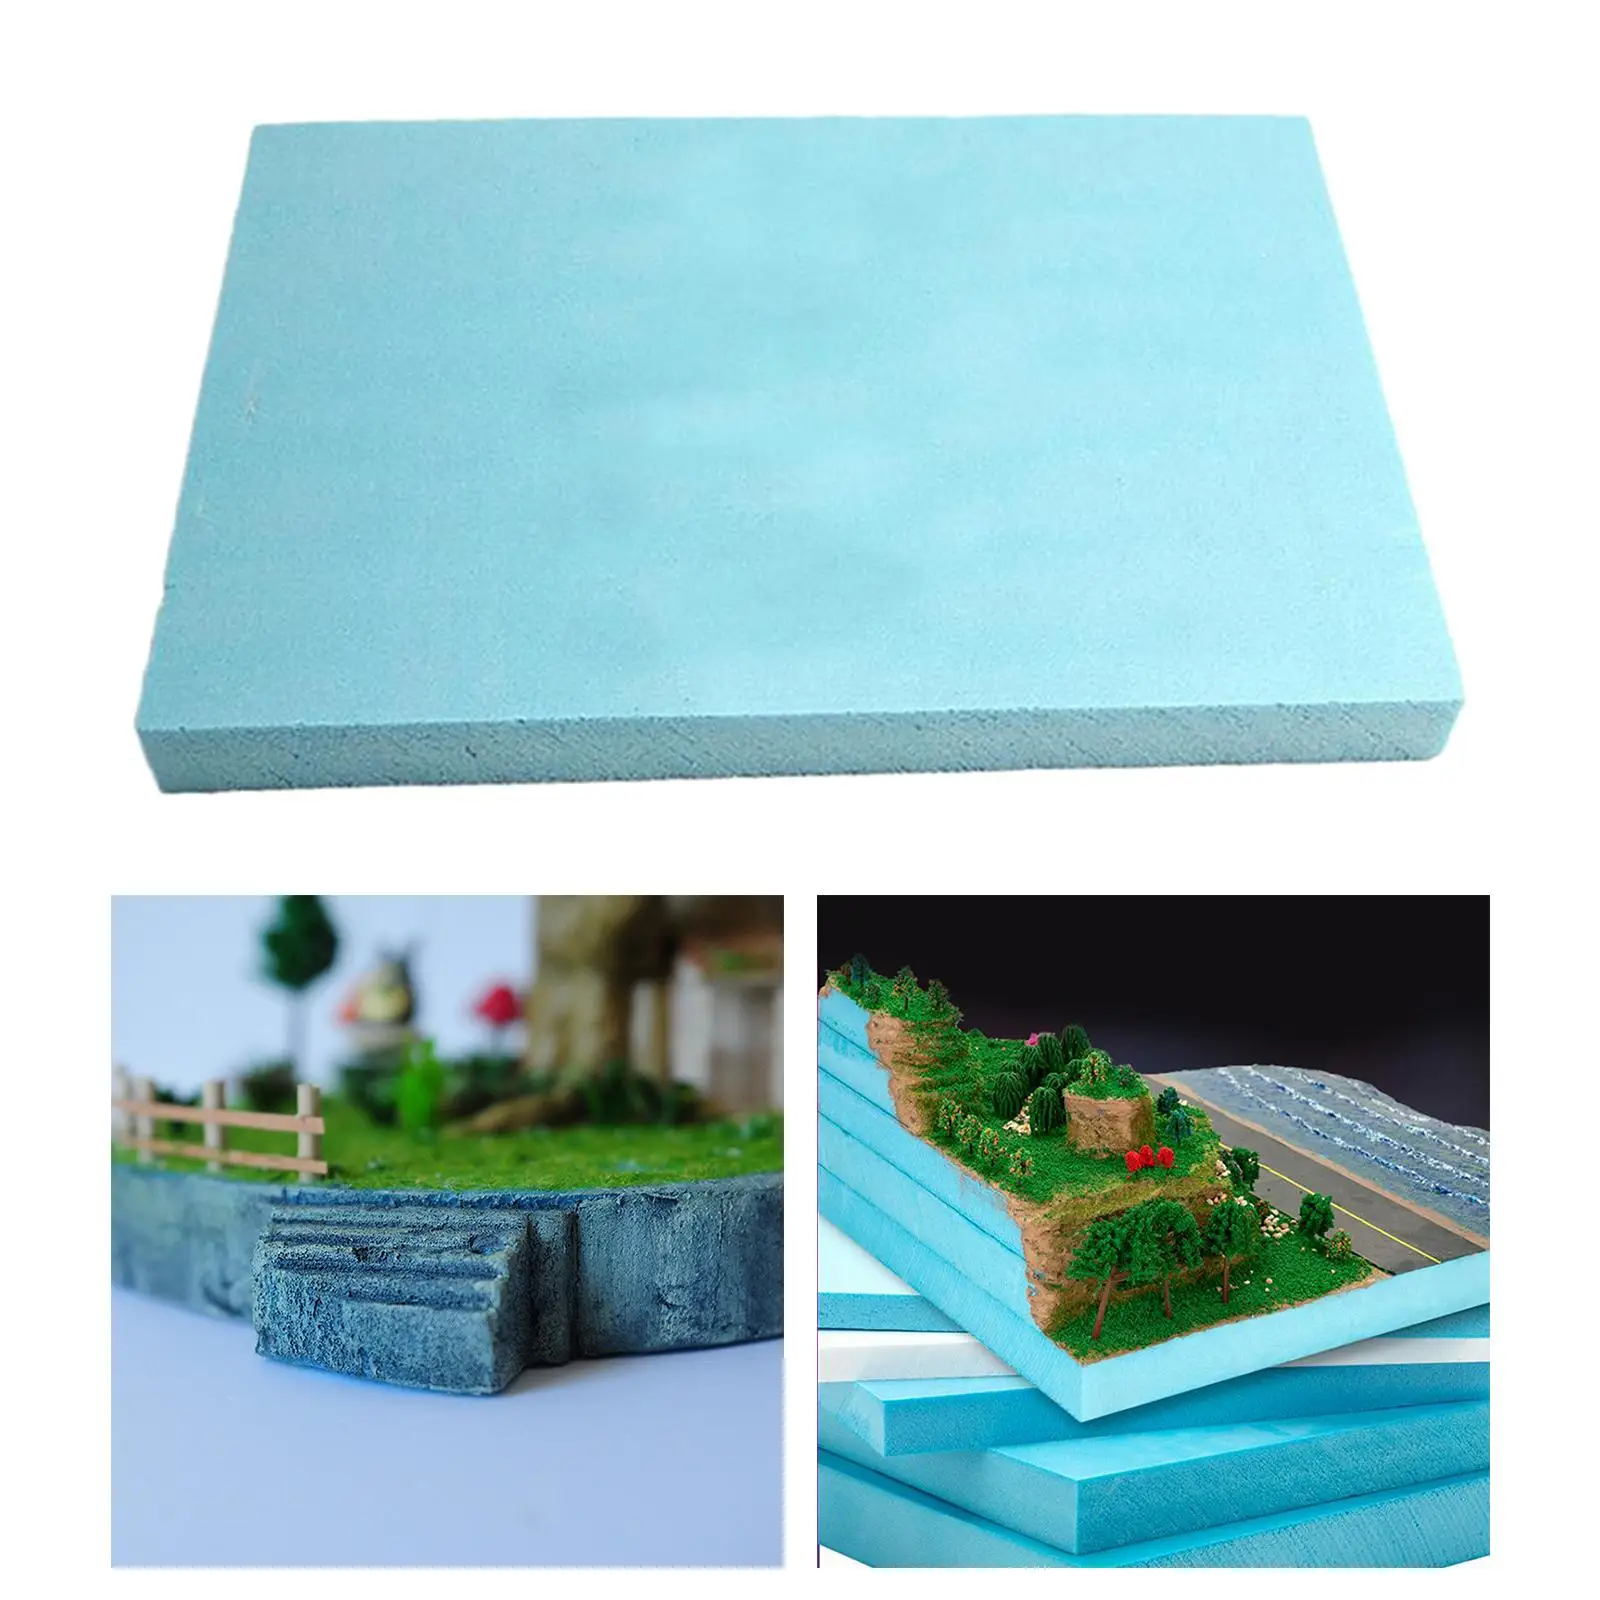 High Density Polystyrene Boards Sculpting Sheets Foam Board Diorama Base for Sculpture Hobby Arts Crafts Modeling Accessories